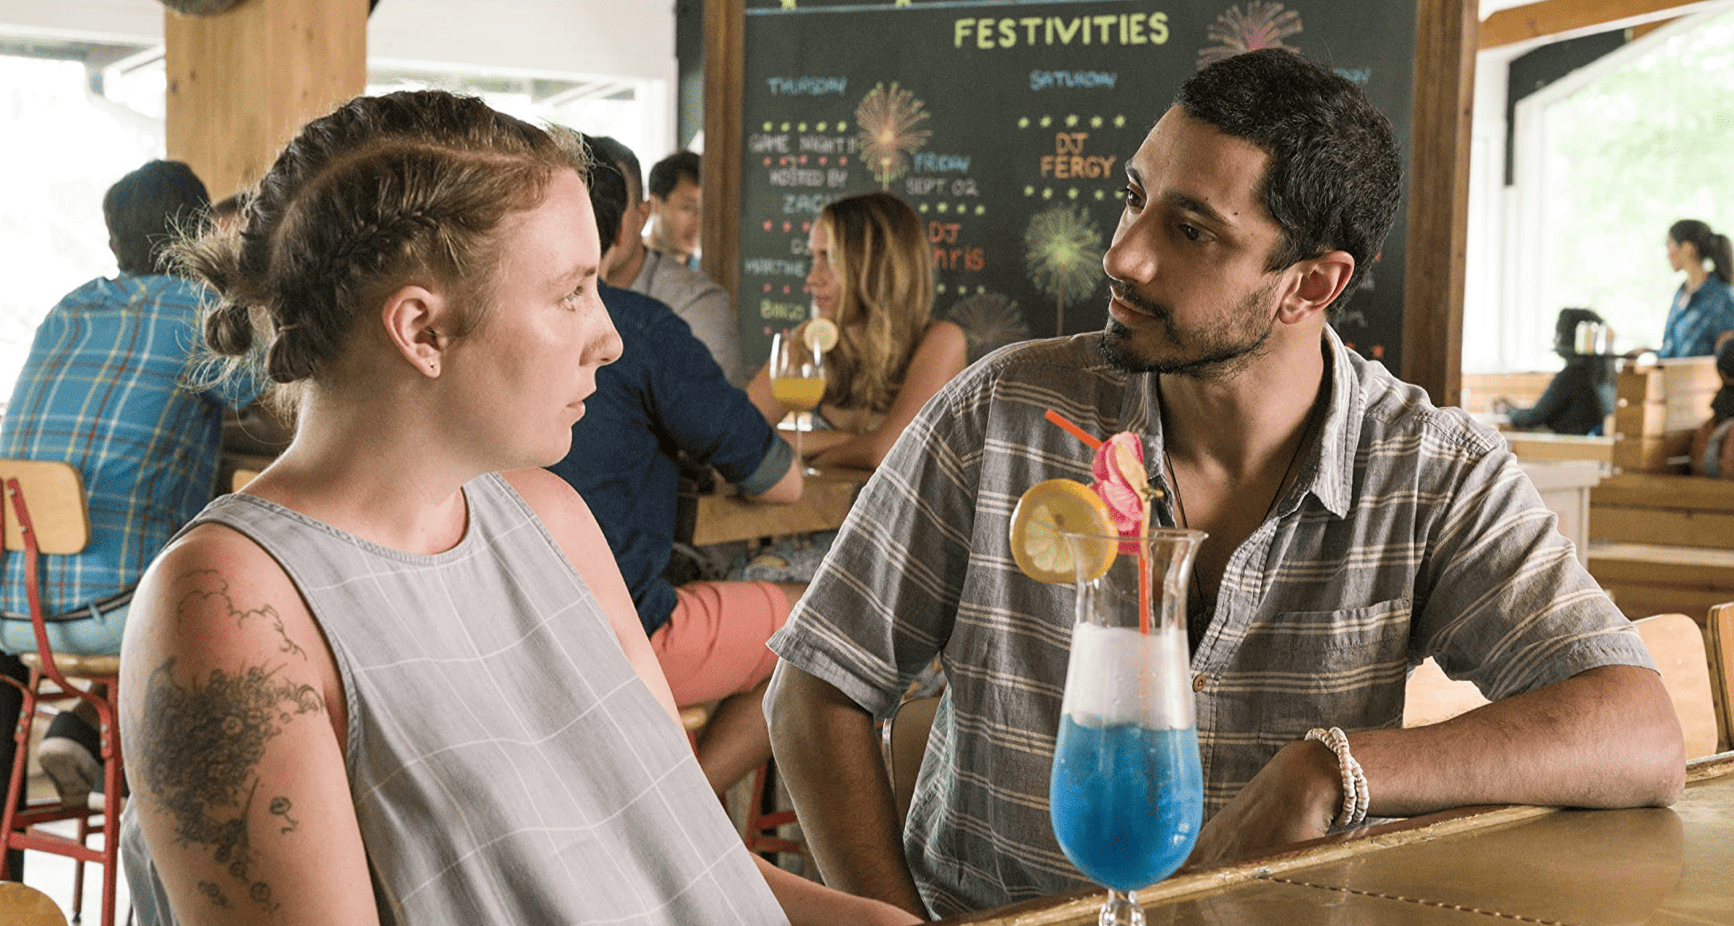 Hannah and Paul-Louis share a drink at a bar in this image from Apatow Productions.